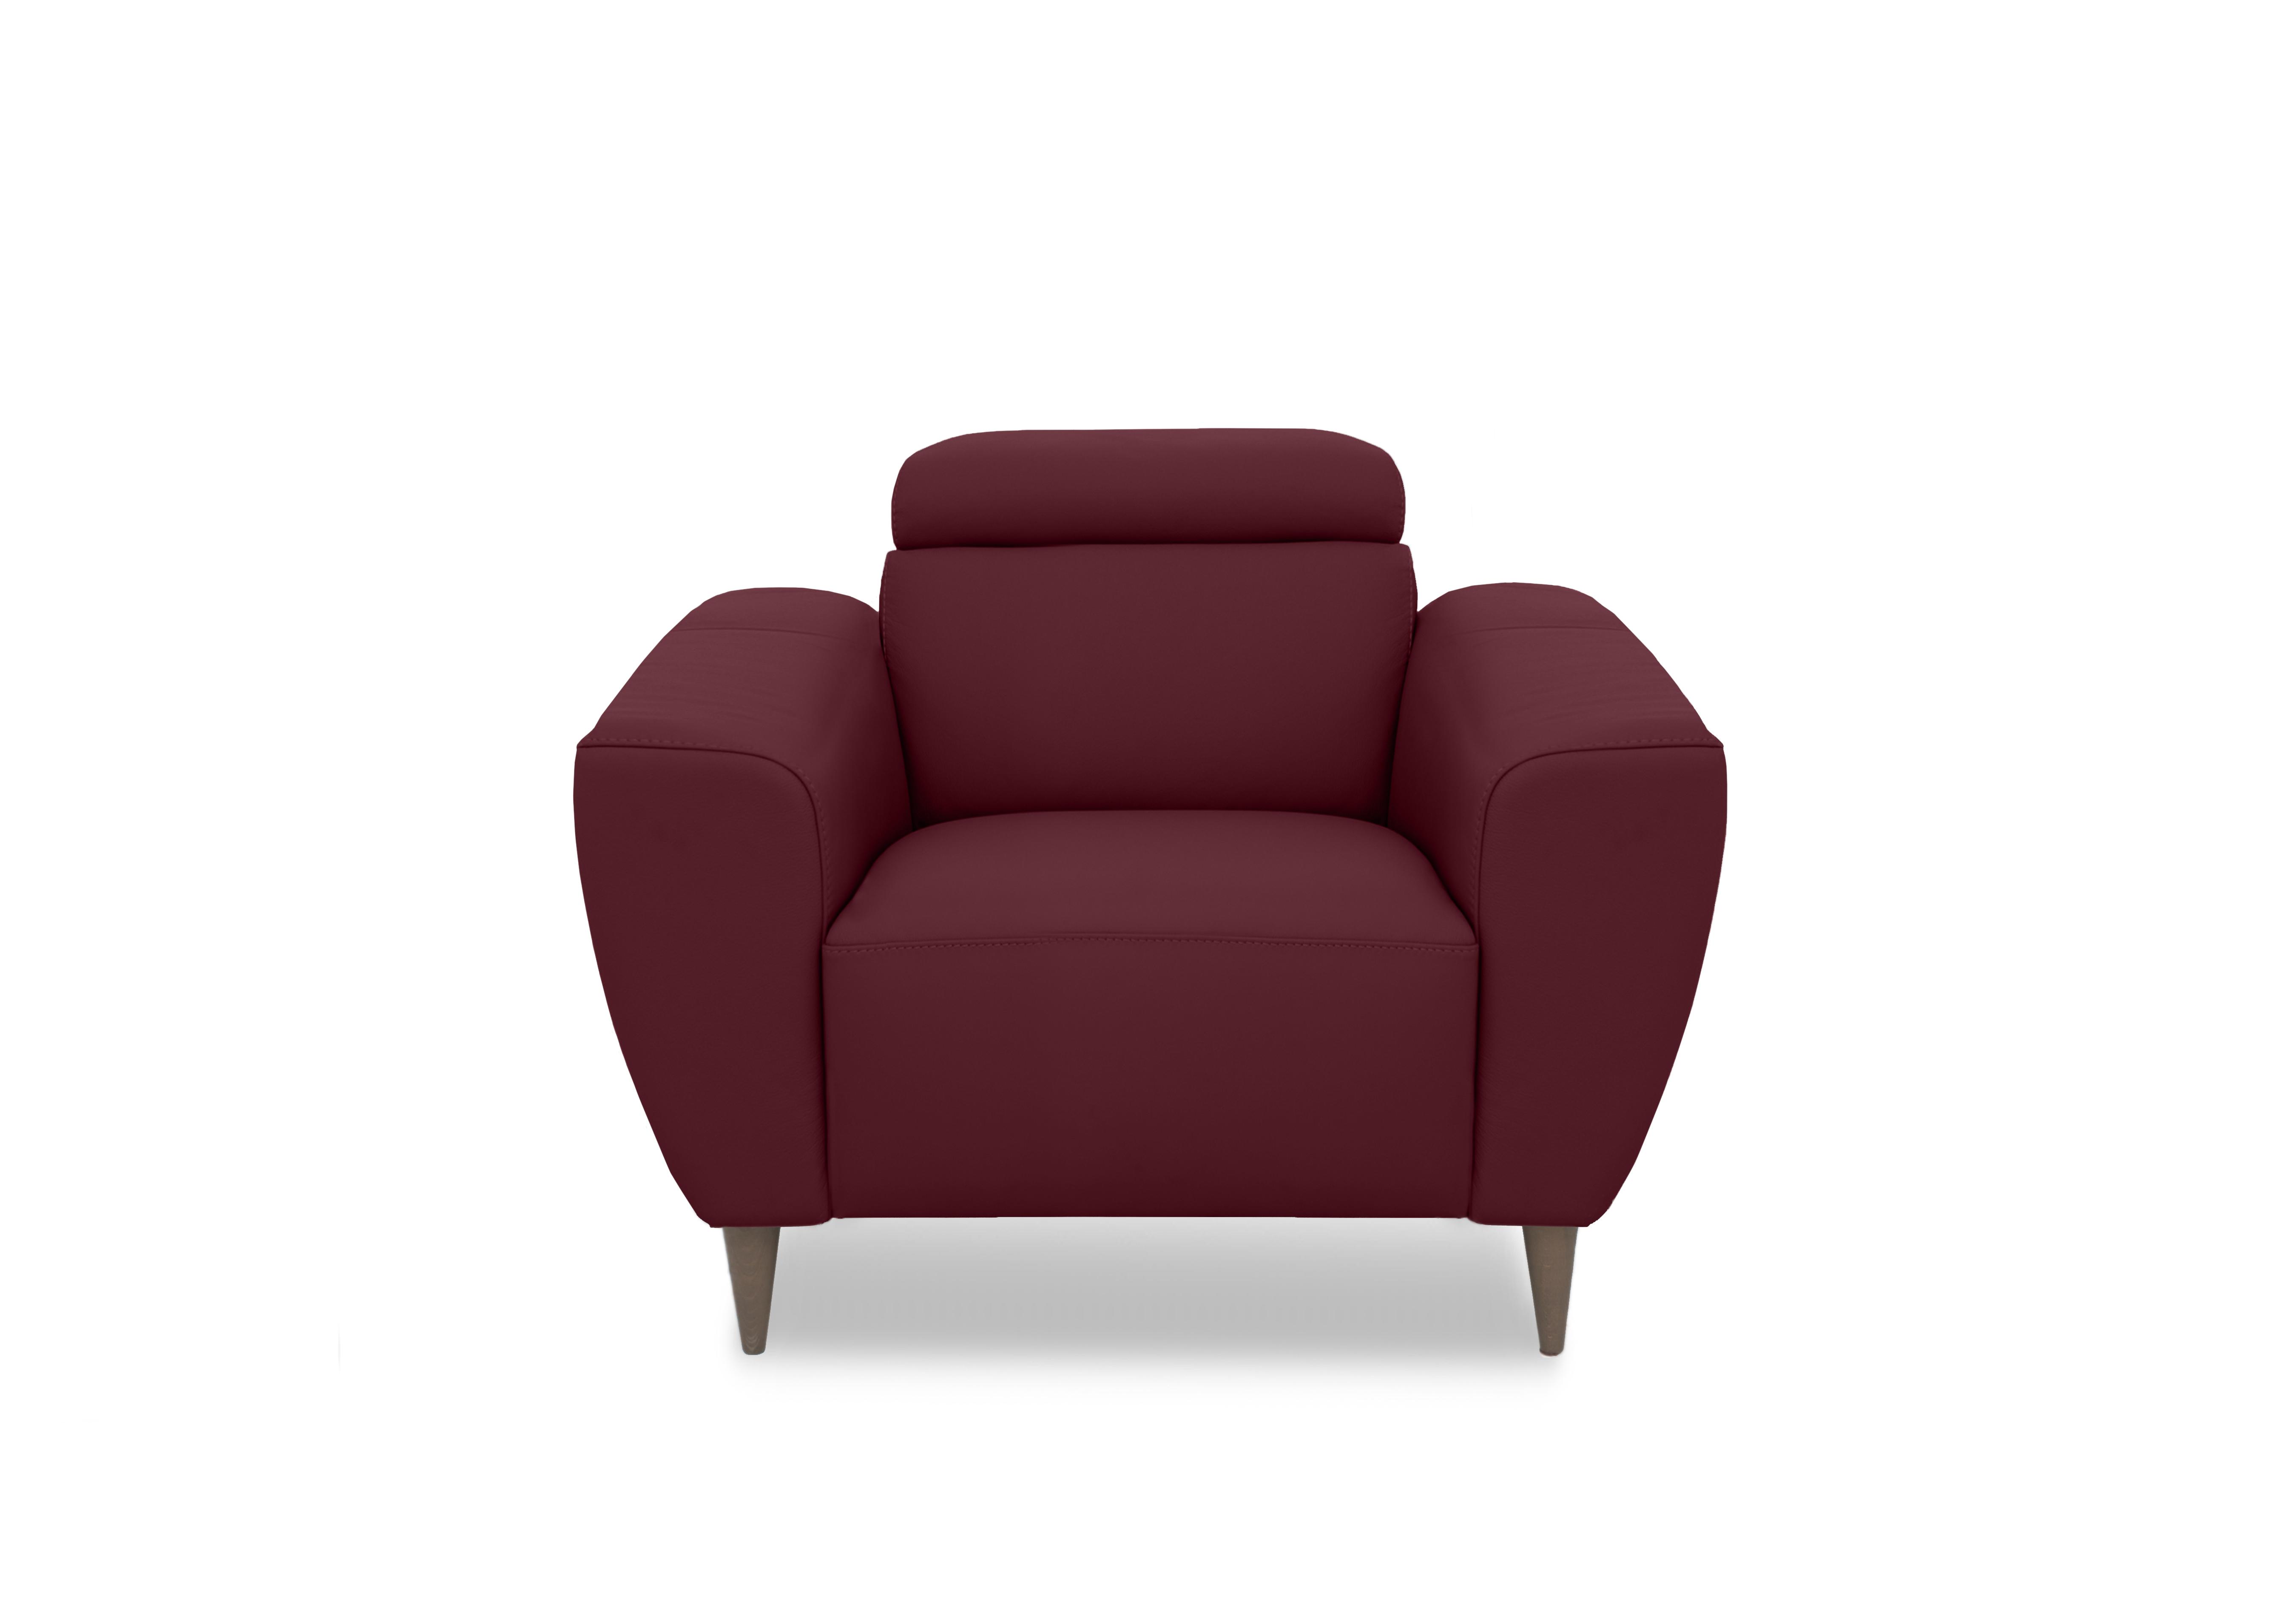 Milano Leather Chair in 1521 Dali Bordeaux To Ft on Furniture Village